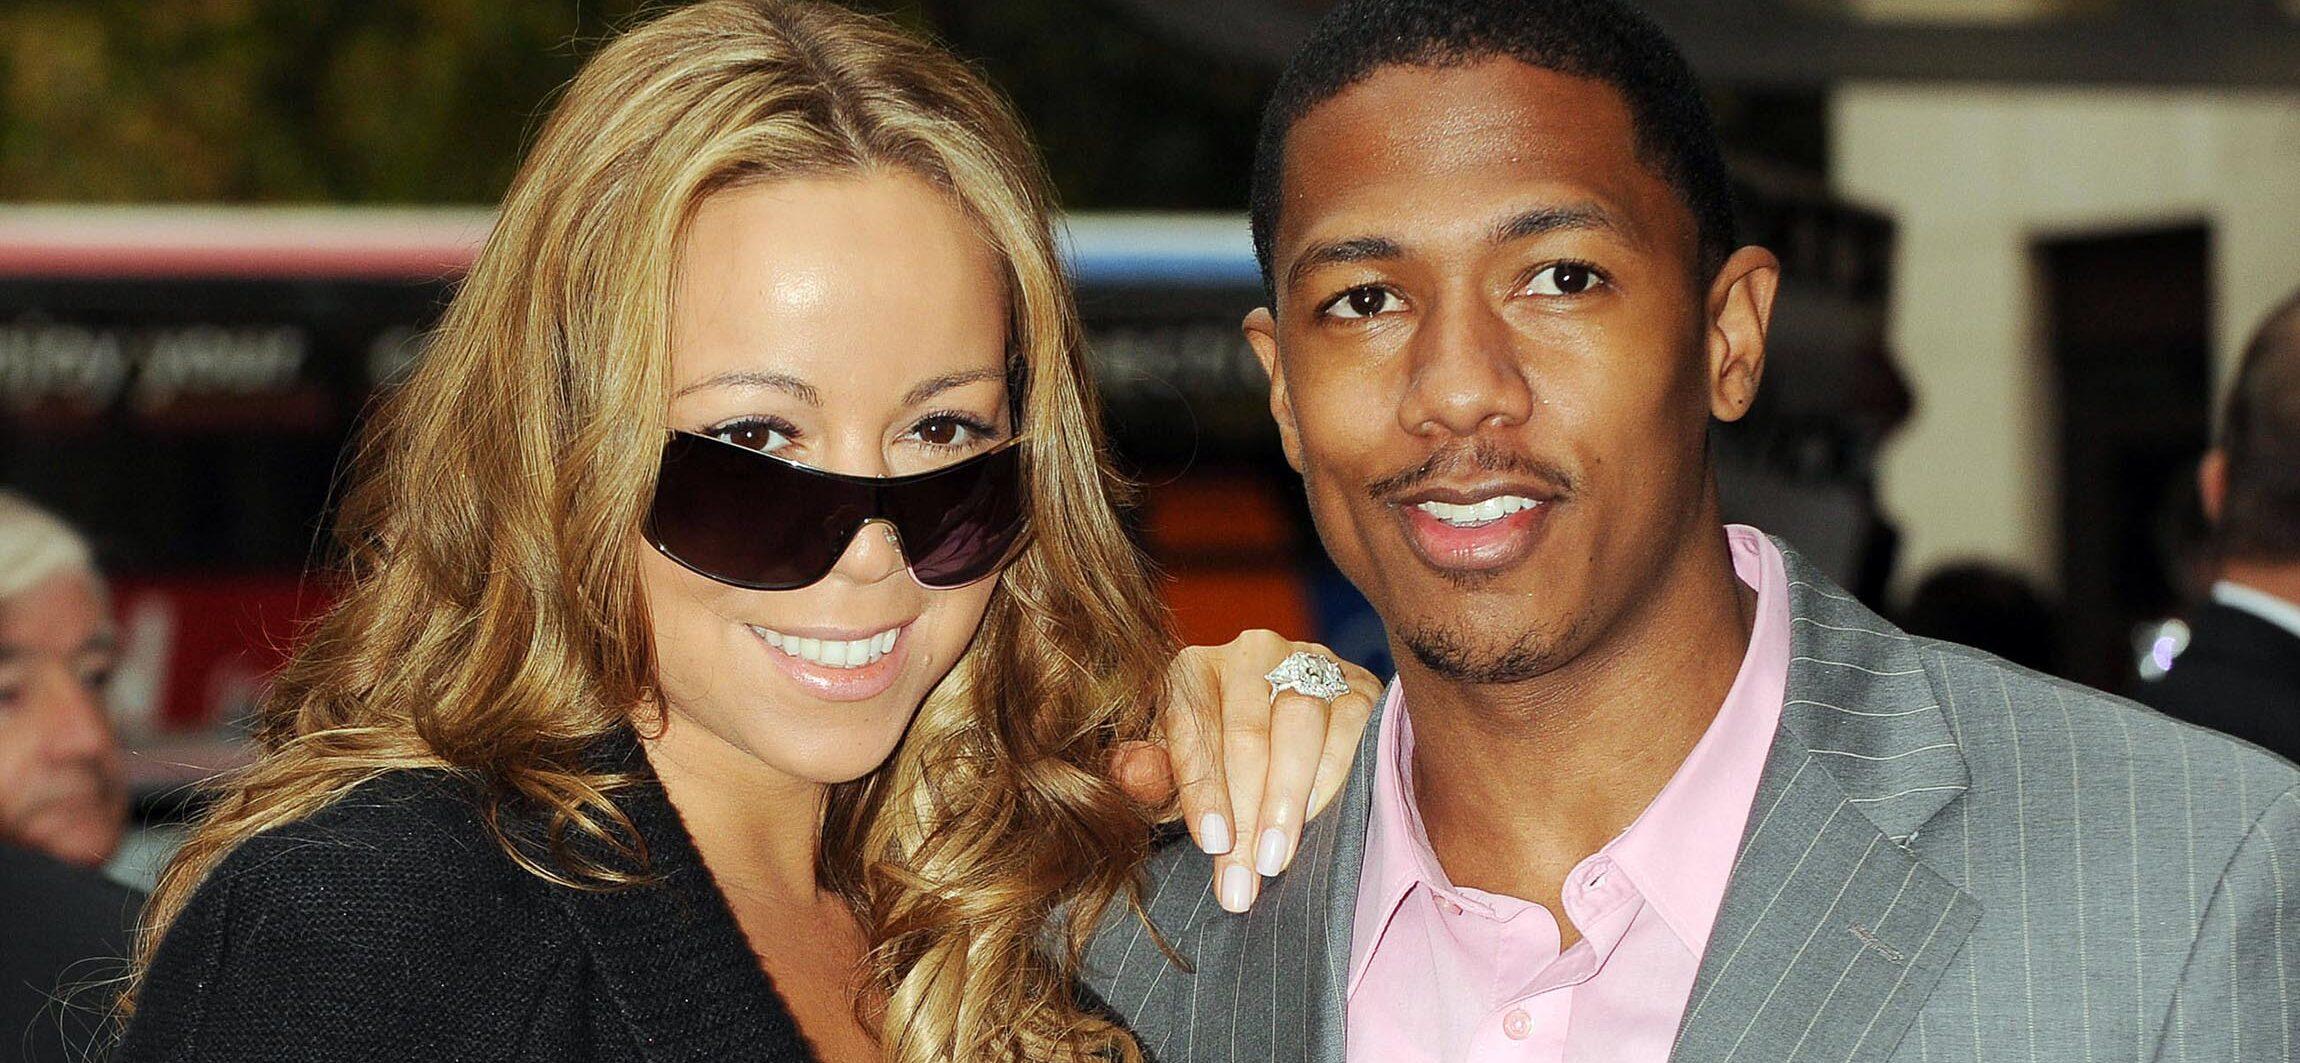 Nick Cannon Denies Claim That He ‘Fumbled’ Marriage With Mariah Carey